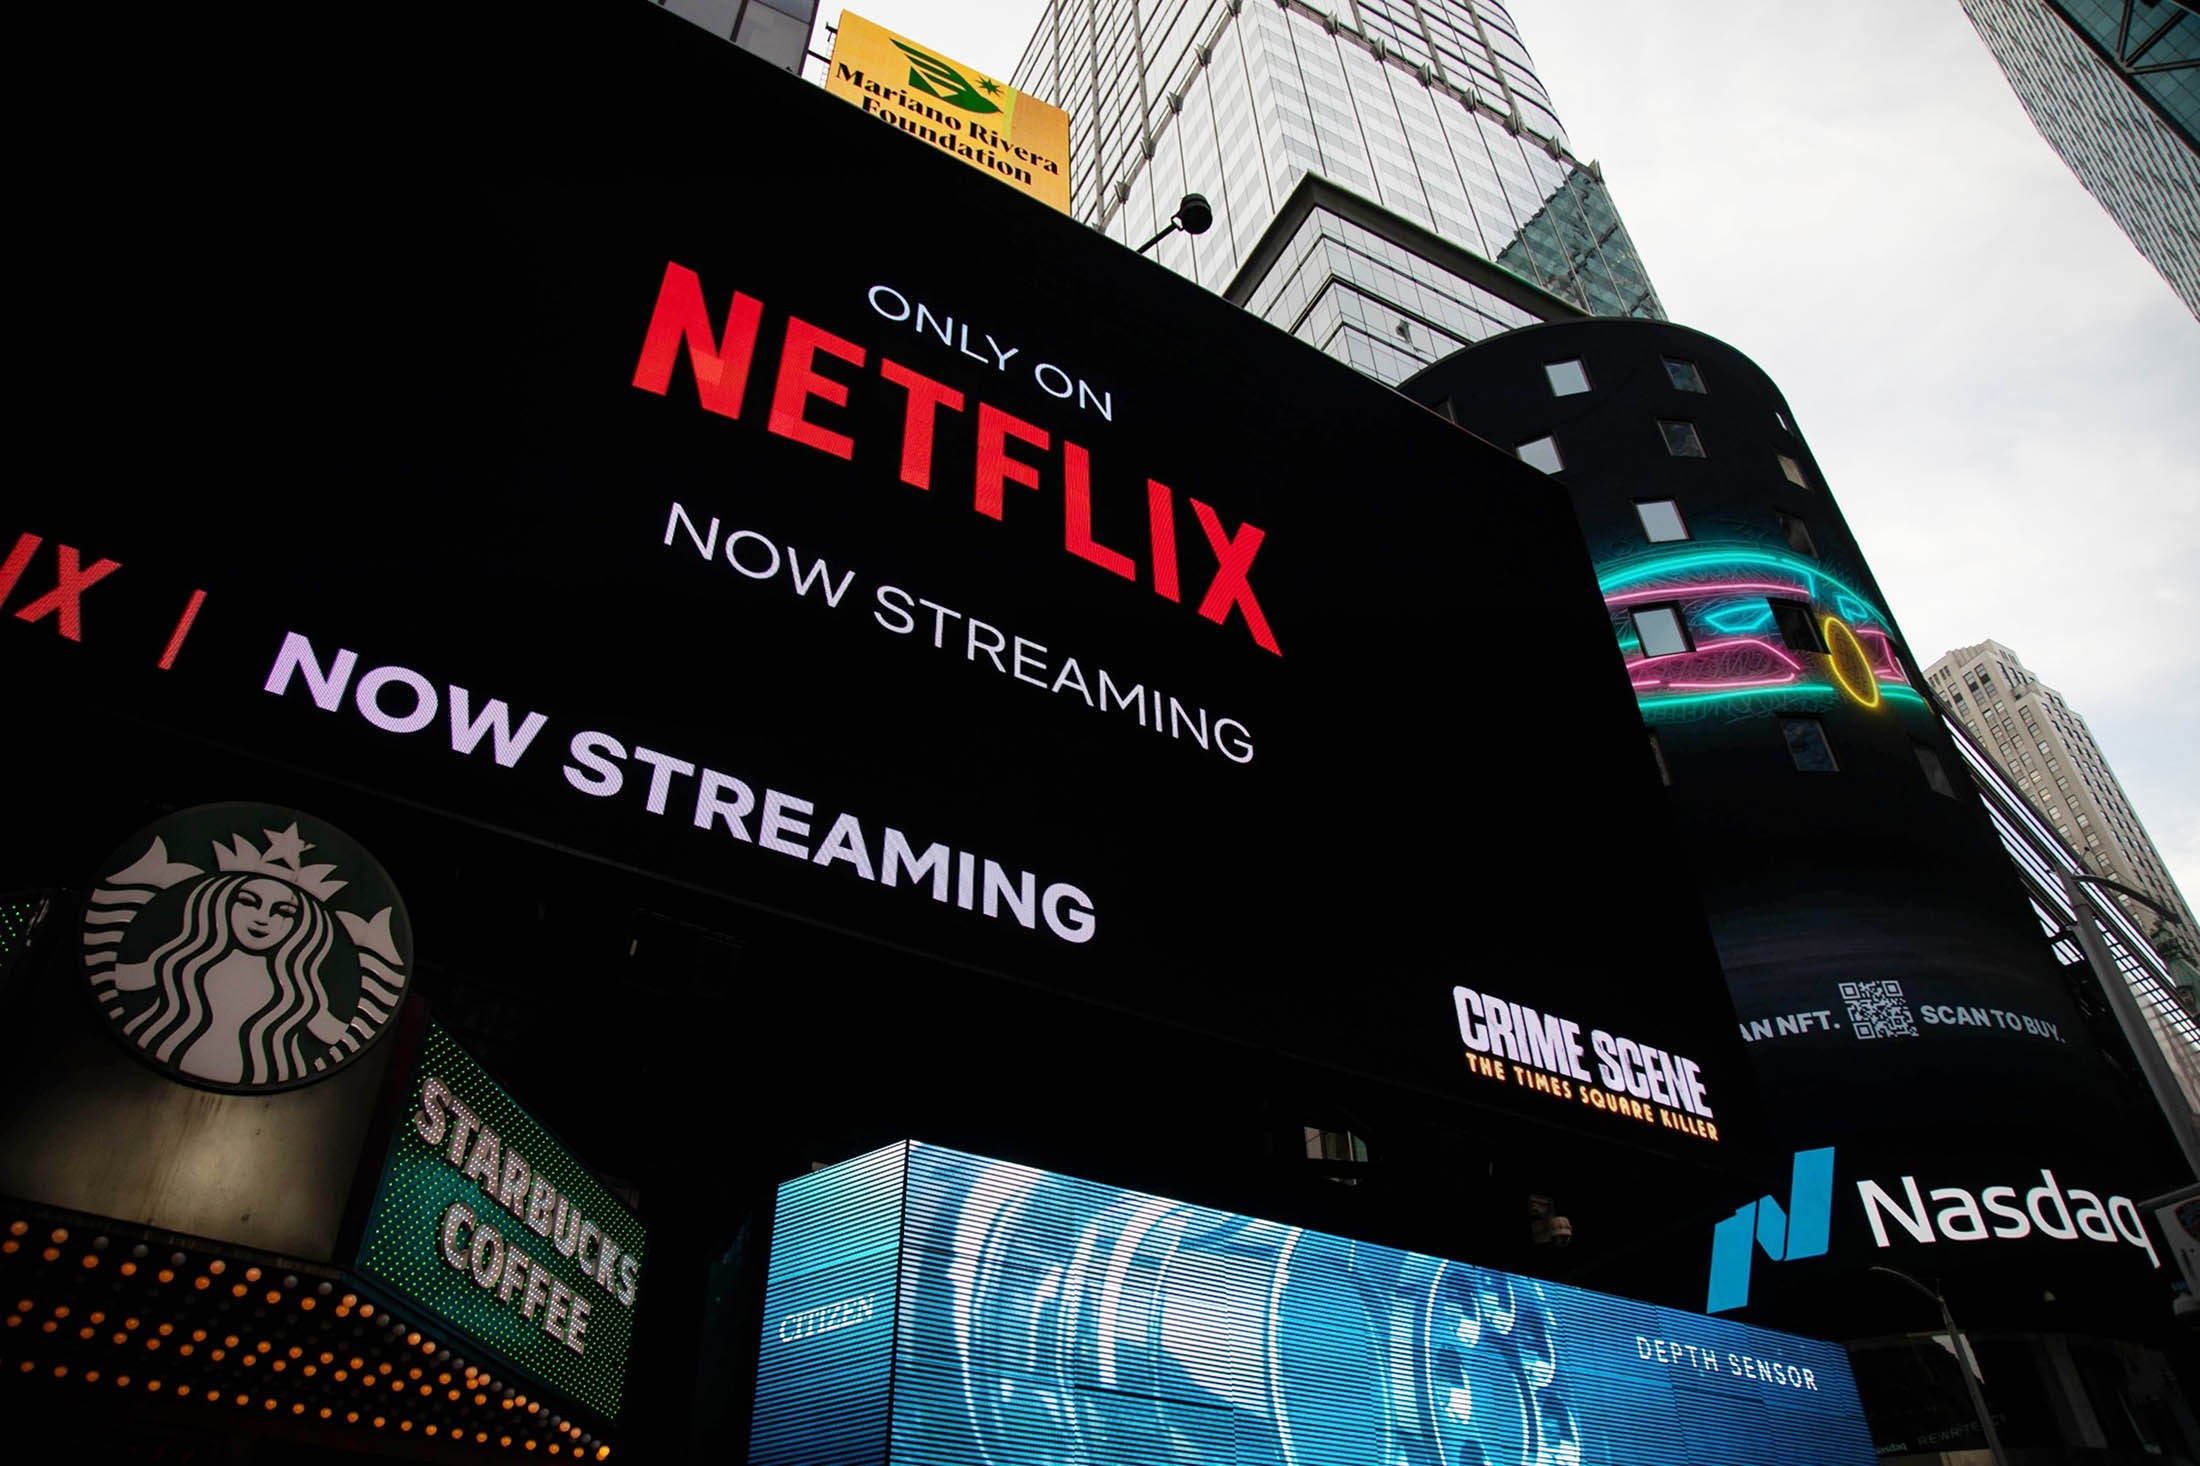 Netflix (NFLX) stock forecast for 2025: End to cable TV?